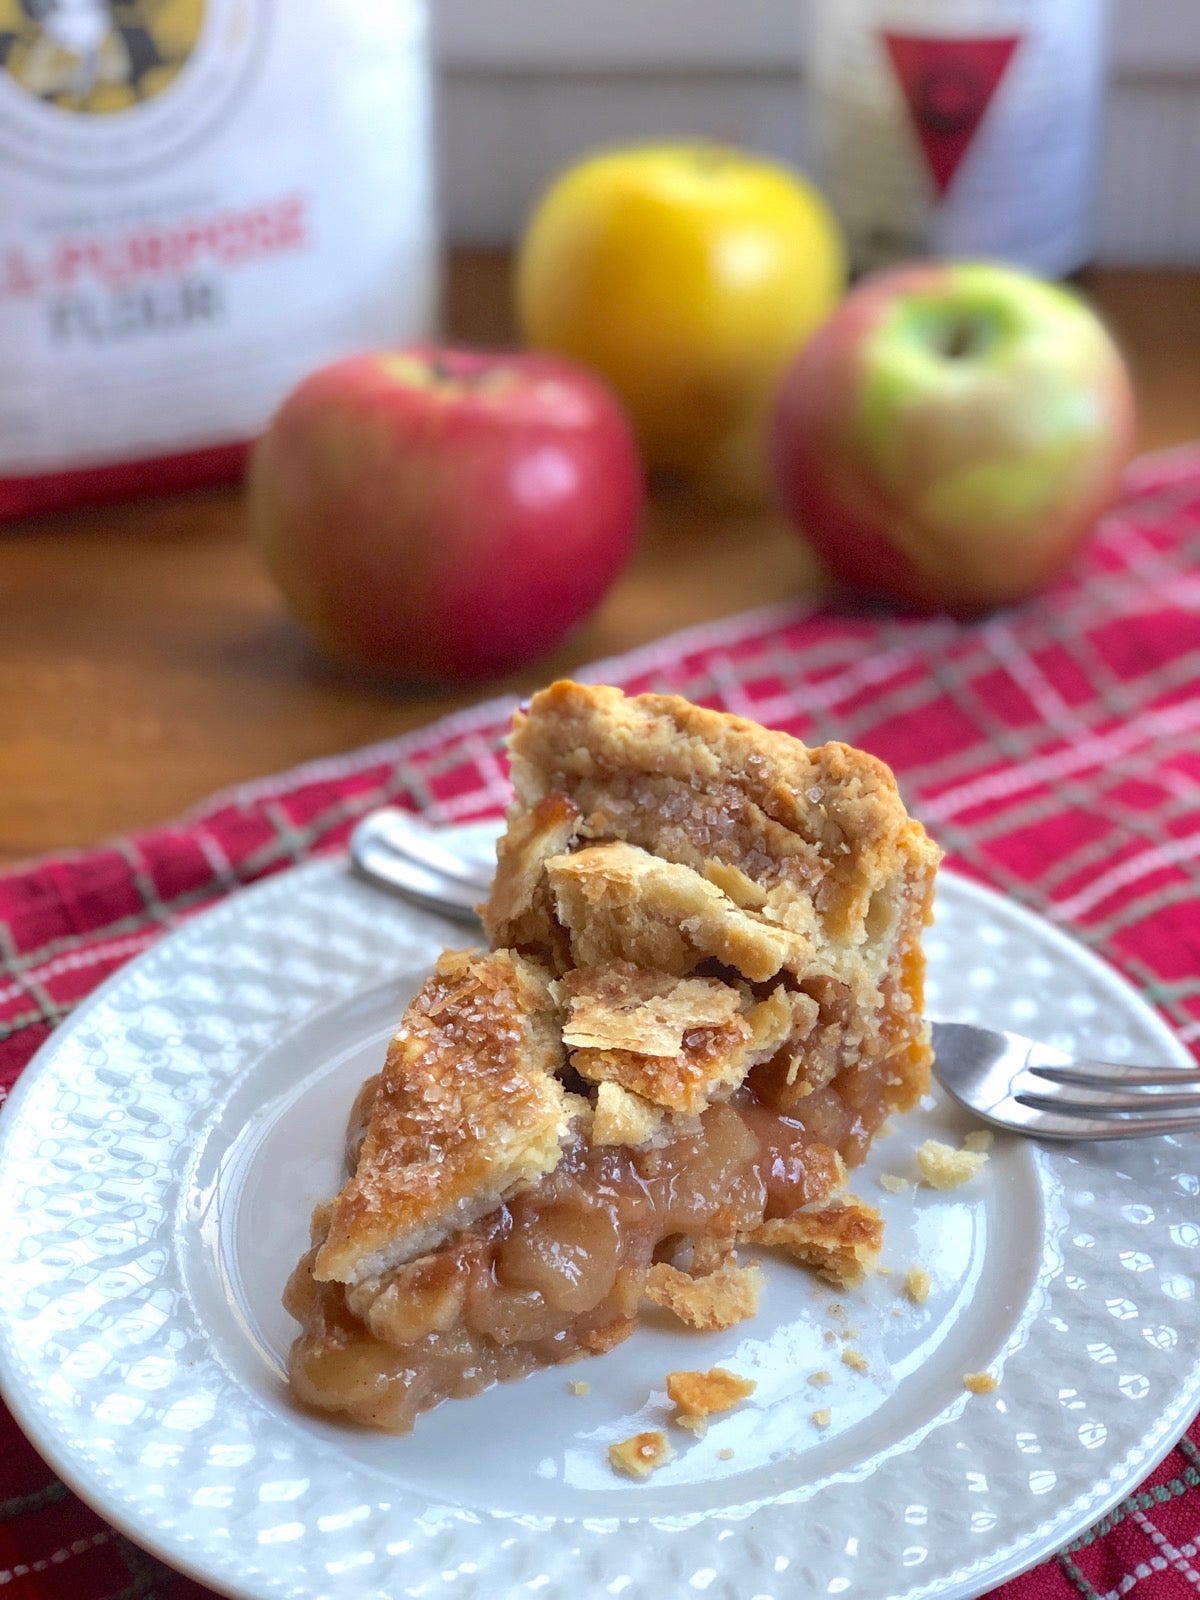 Slice of apple pie on a plate, apples in the background.